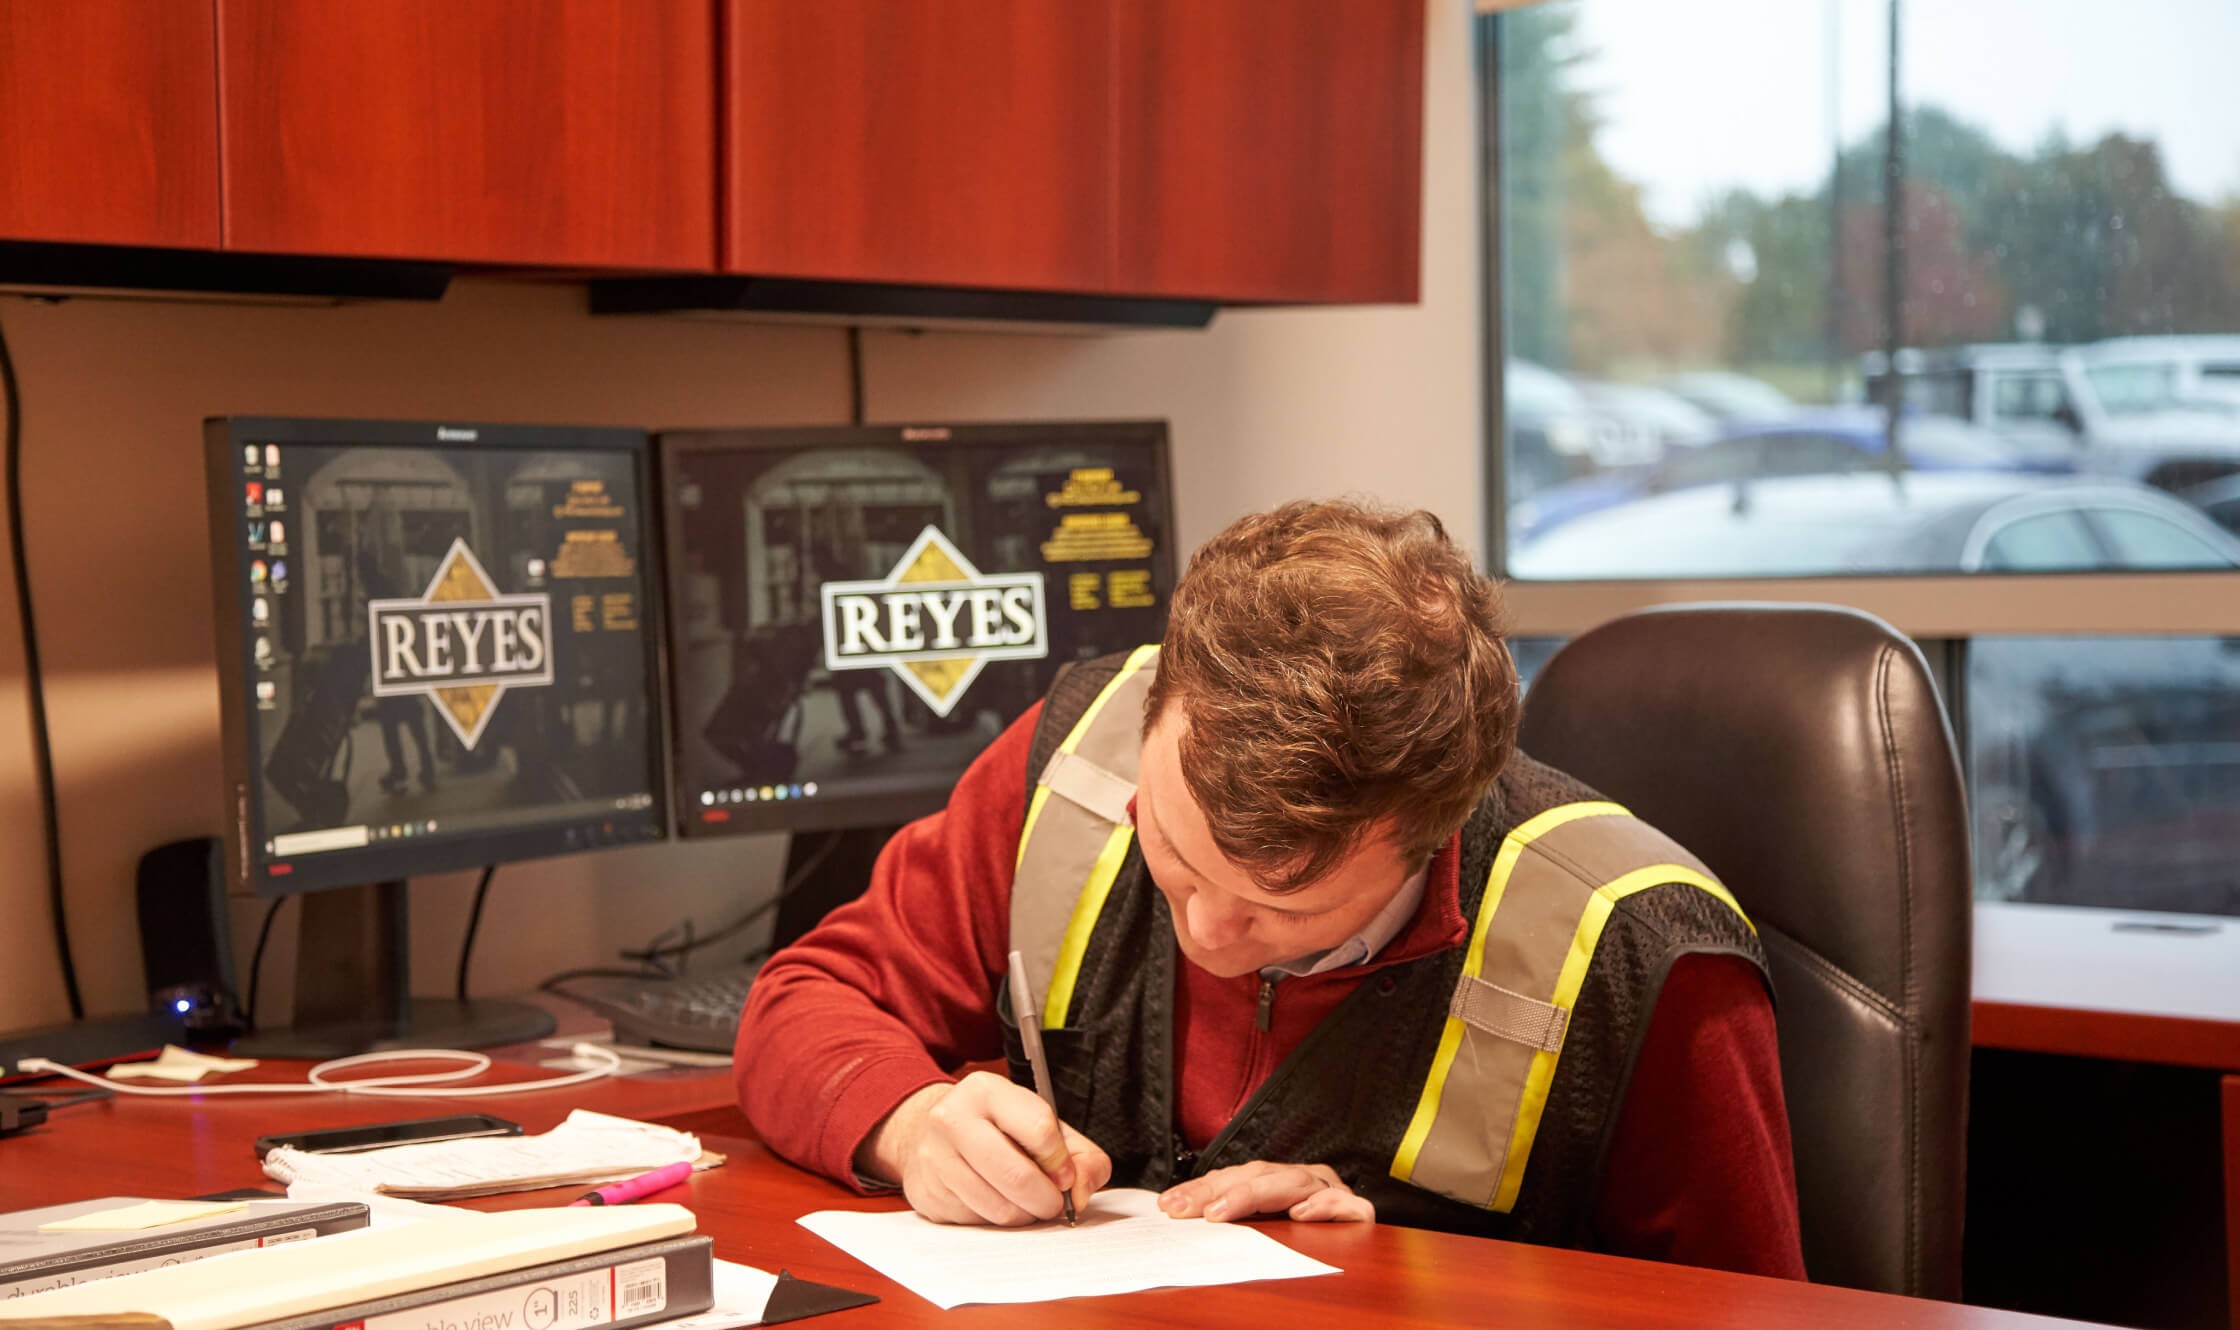 Reyes Beer Division employee sitting in office, writing on paper with monitors behind them